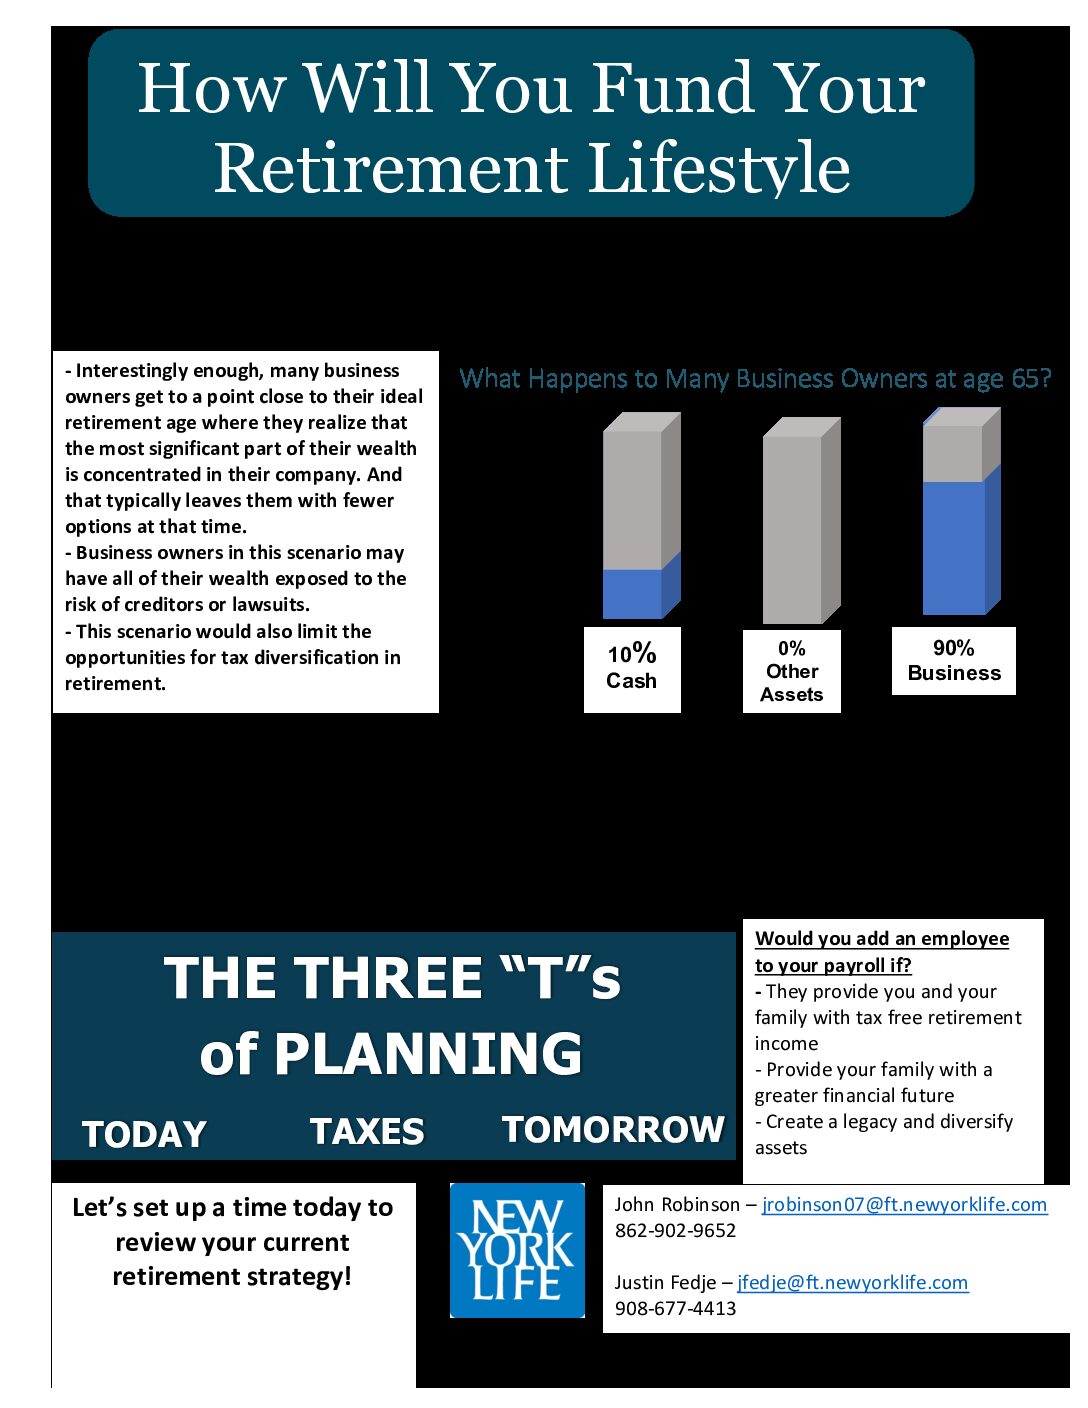 How Will You Fund Your Retirement Lifestyle